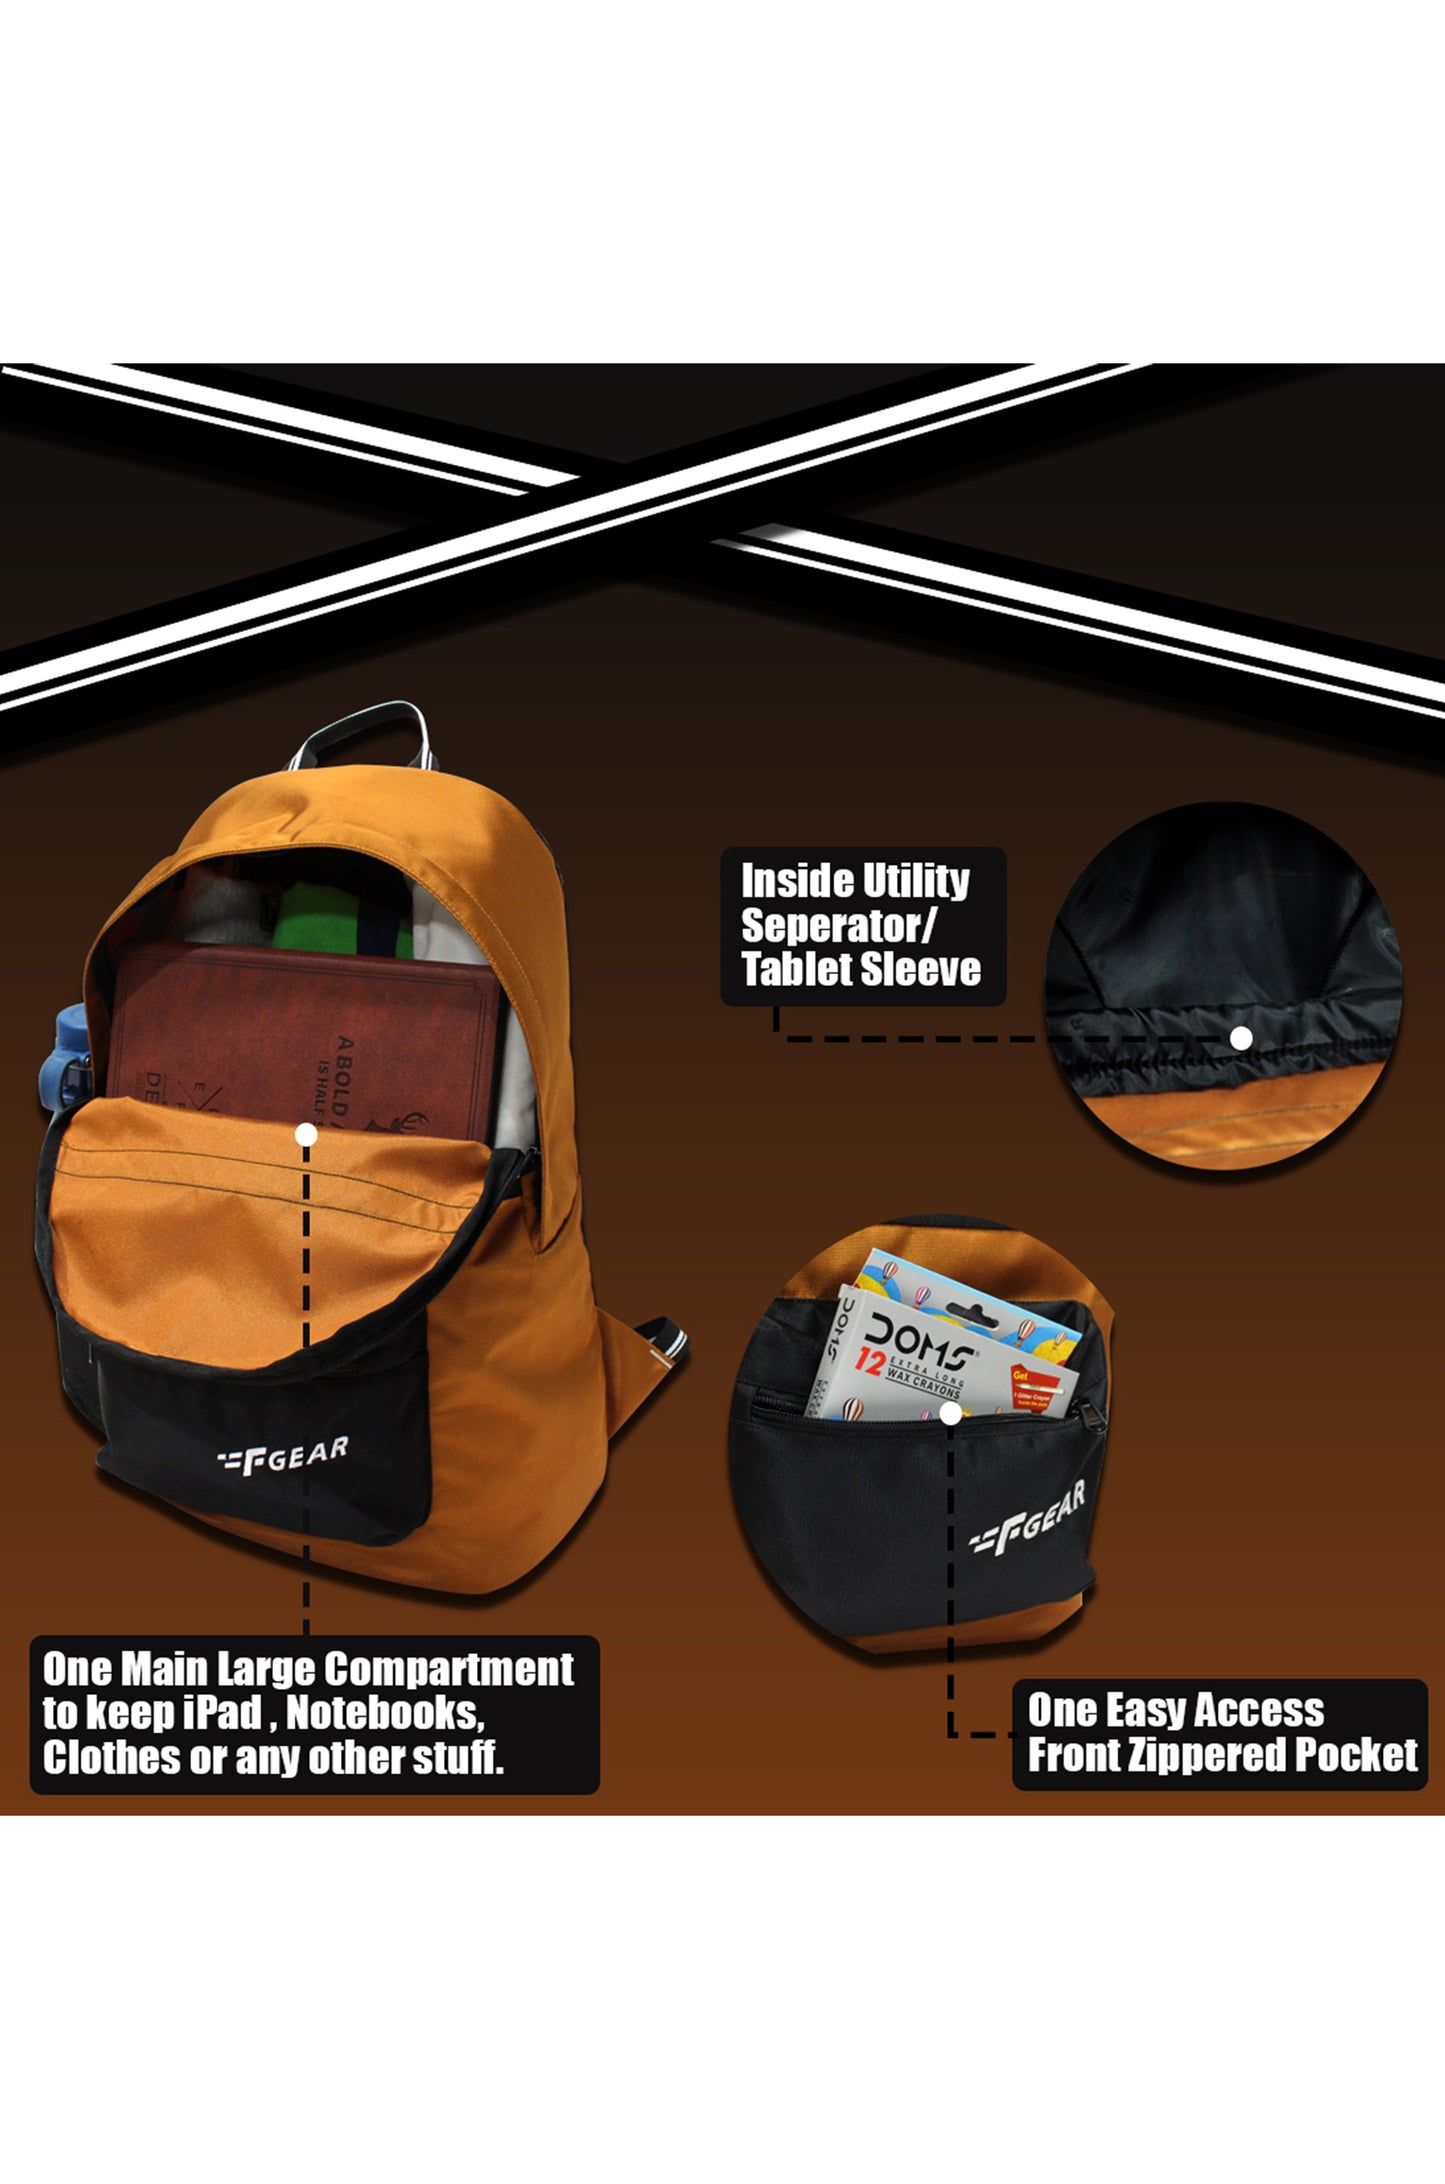 Inherent 22L Cathy Backpack